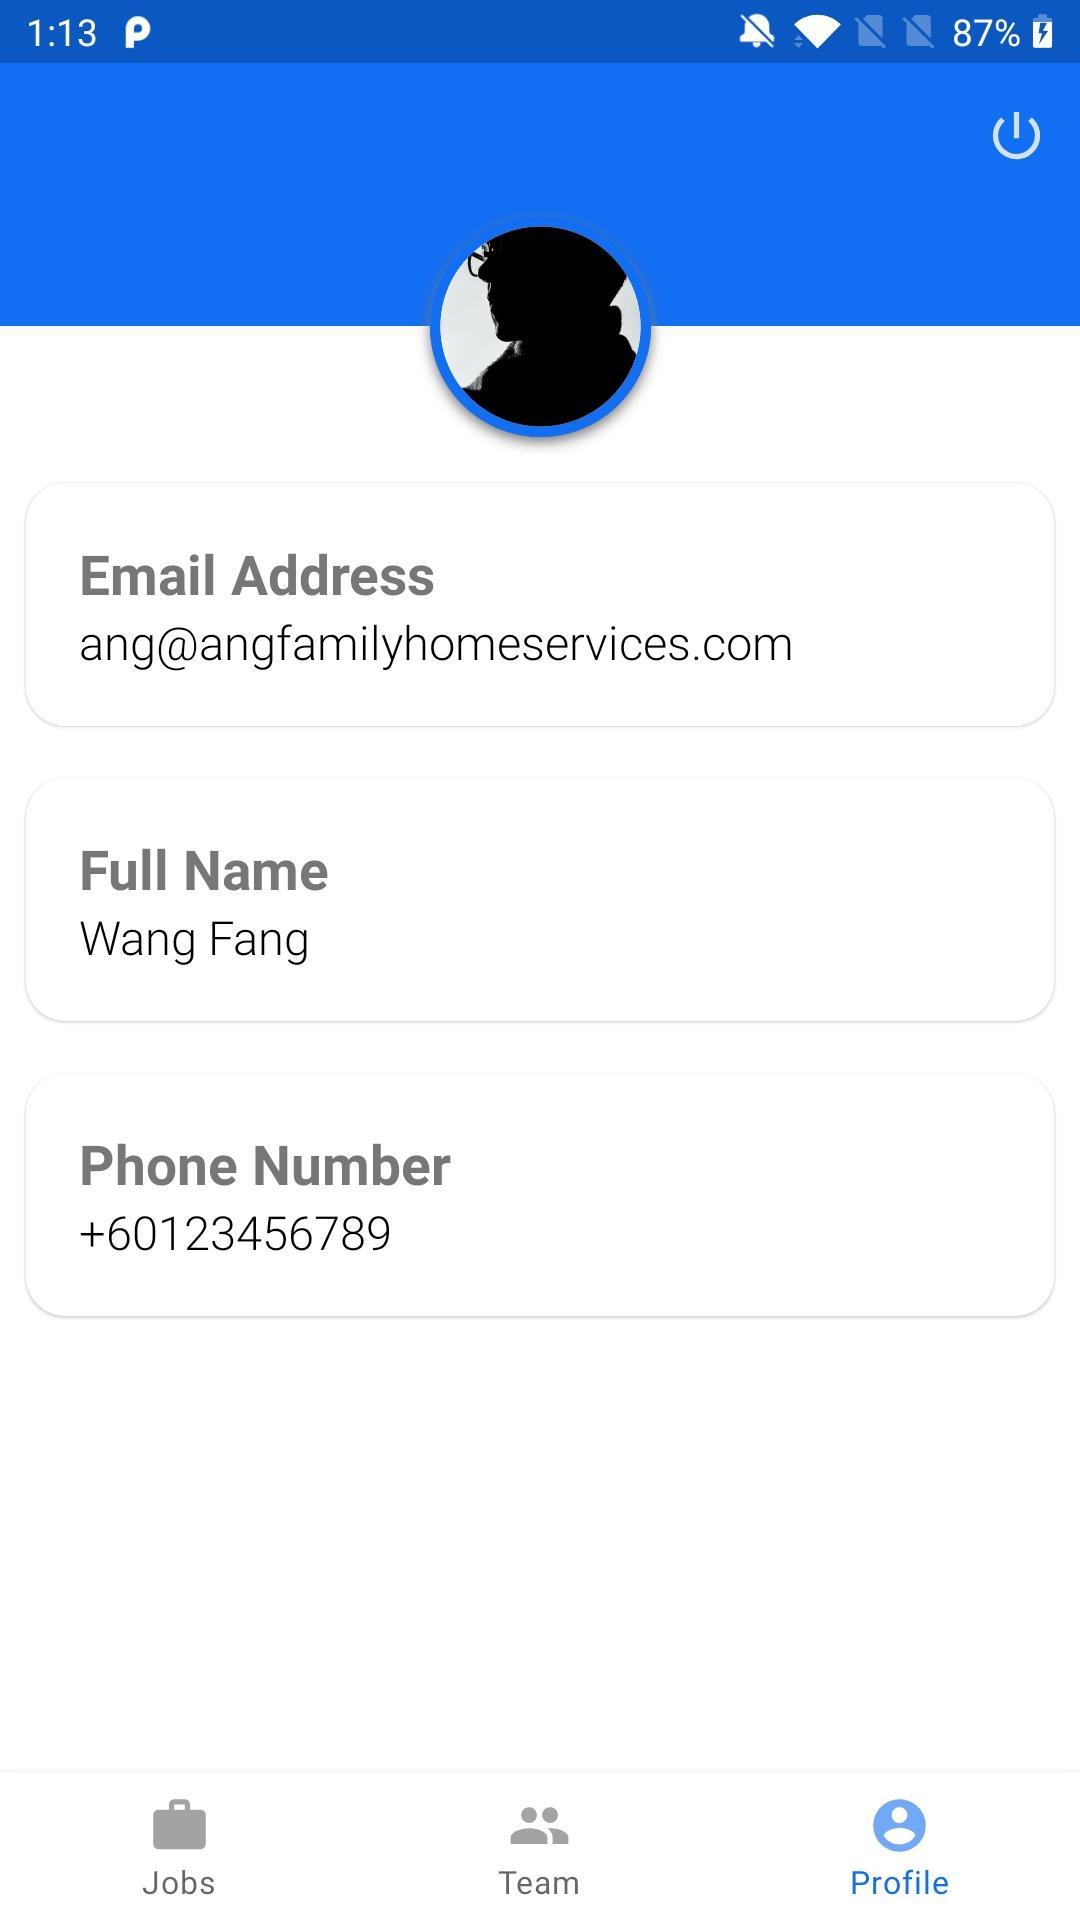 ANG Family Home Services - Crew 1.0.6 Screenshot 12